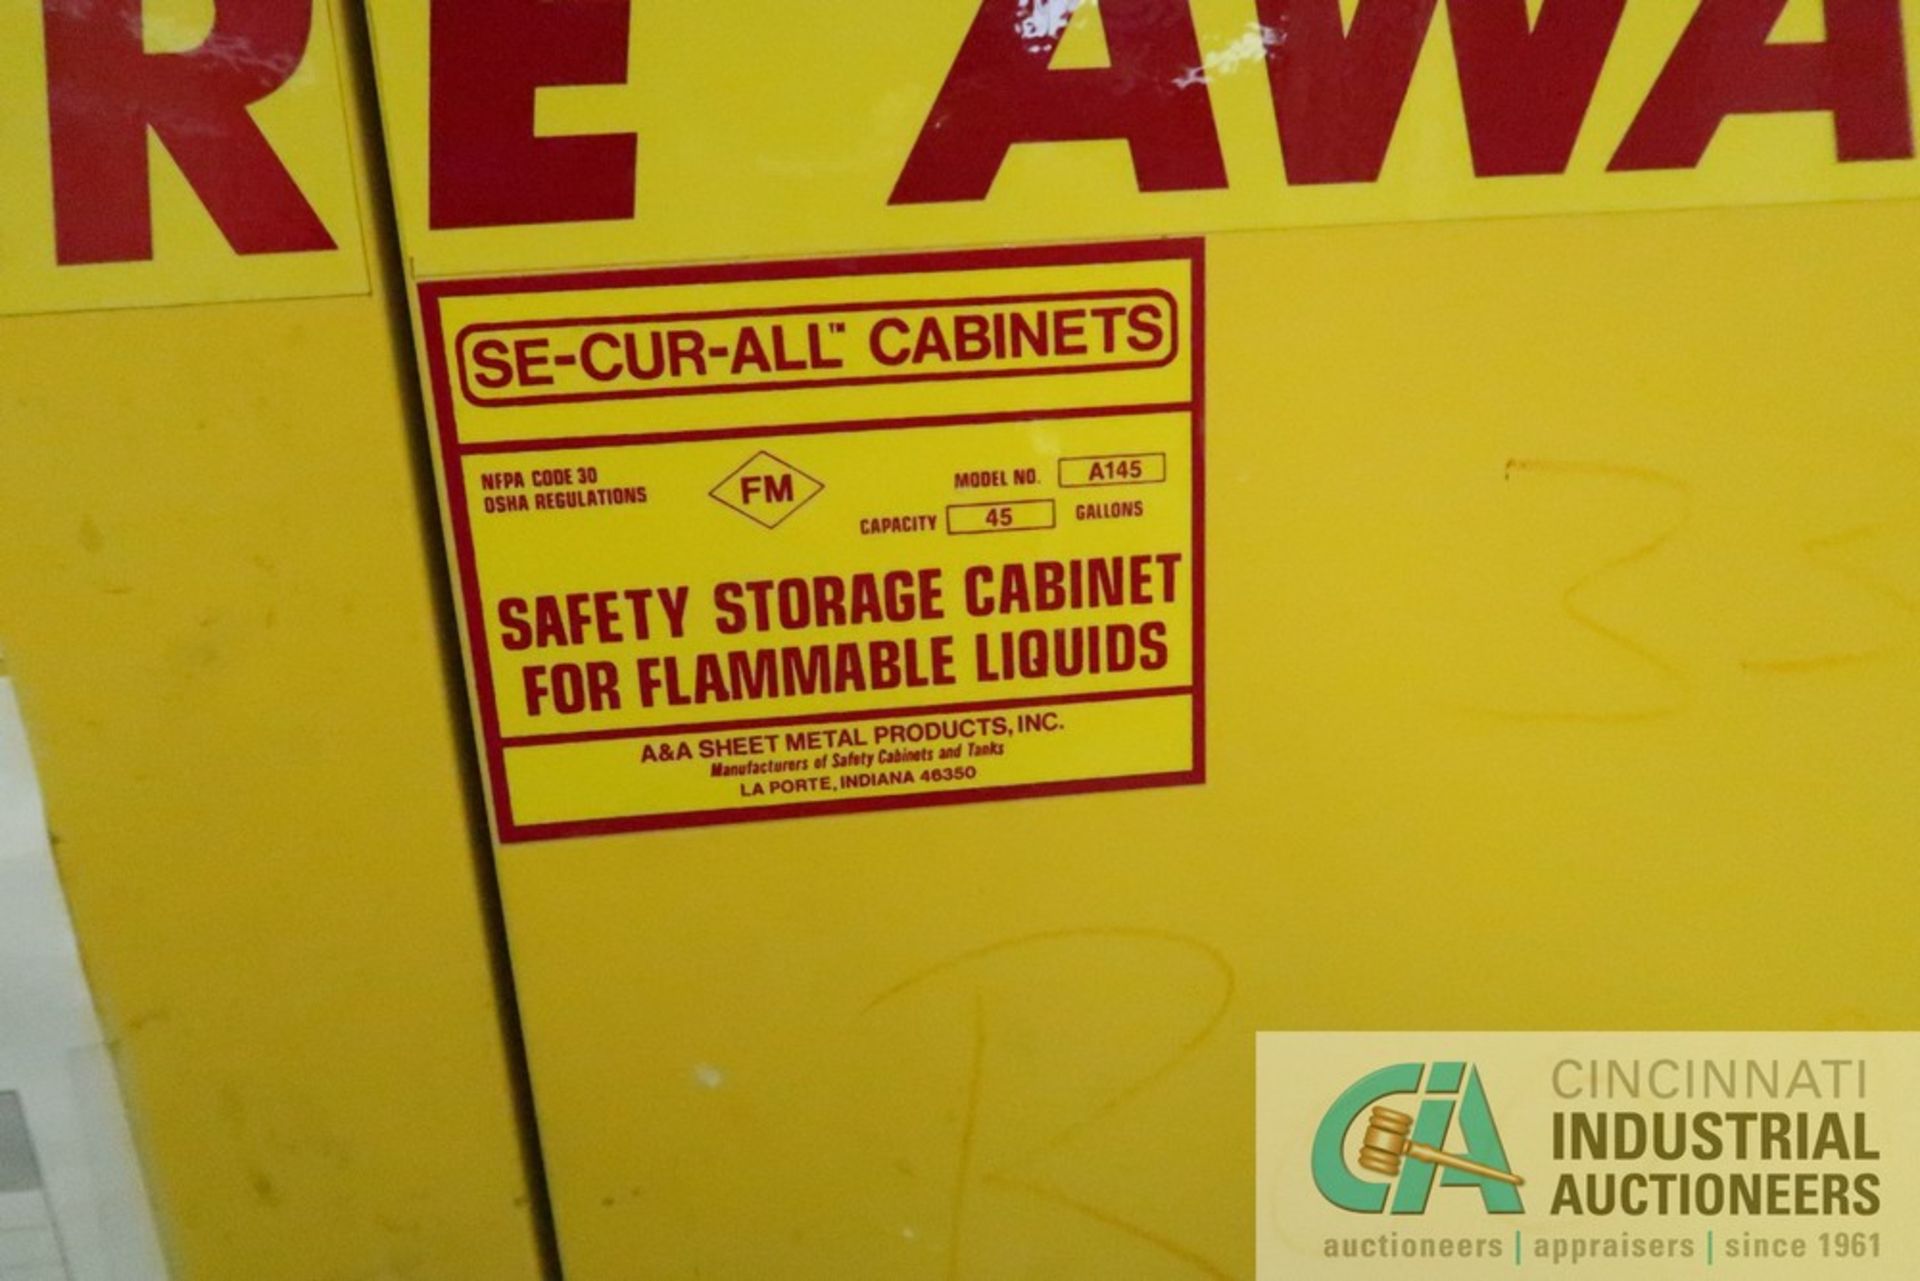 45 GALLON SE-CUR-ALL MODEL A145 FLAMMABLE LIQUID CABINET (ROOM 22) - Located in the basement - Image 2 of 3